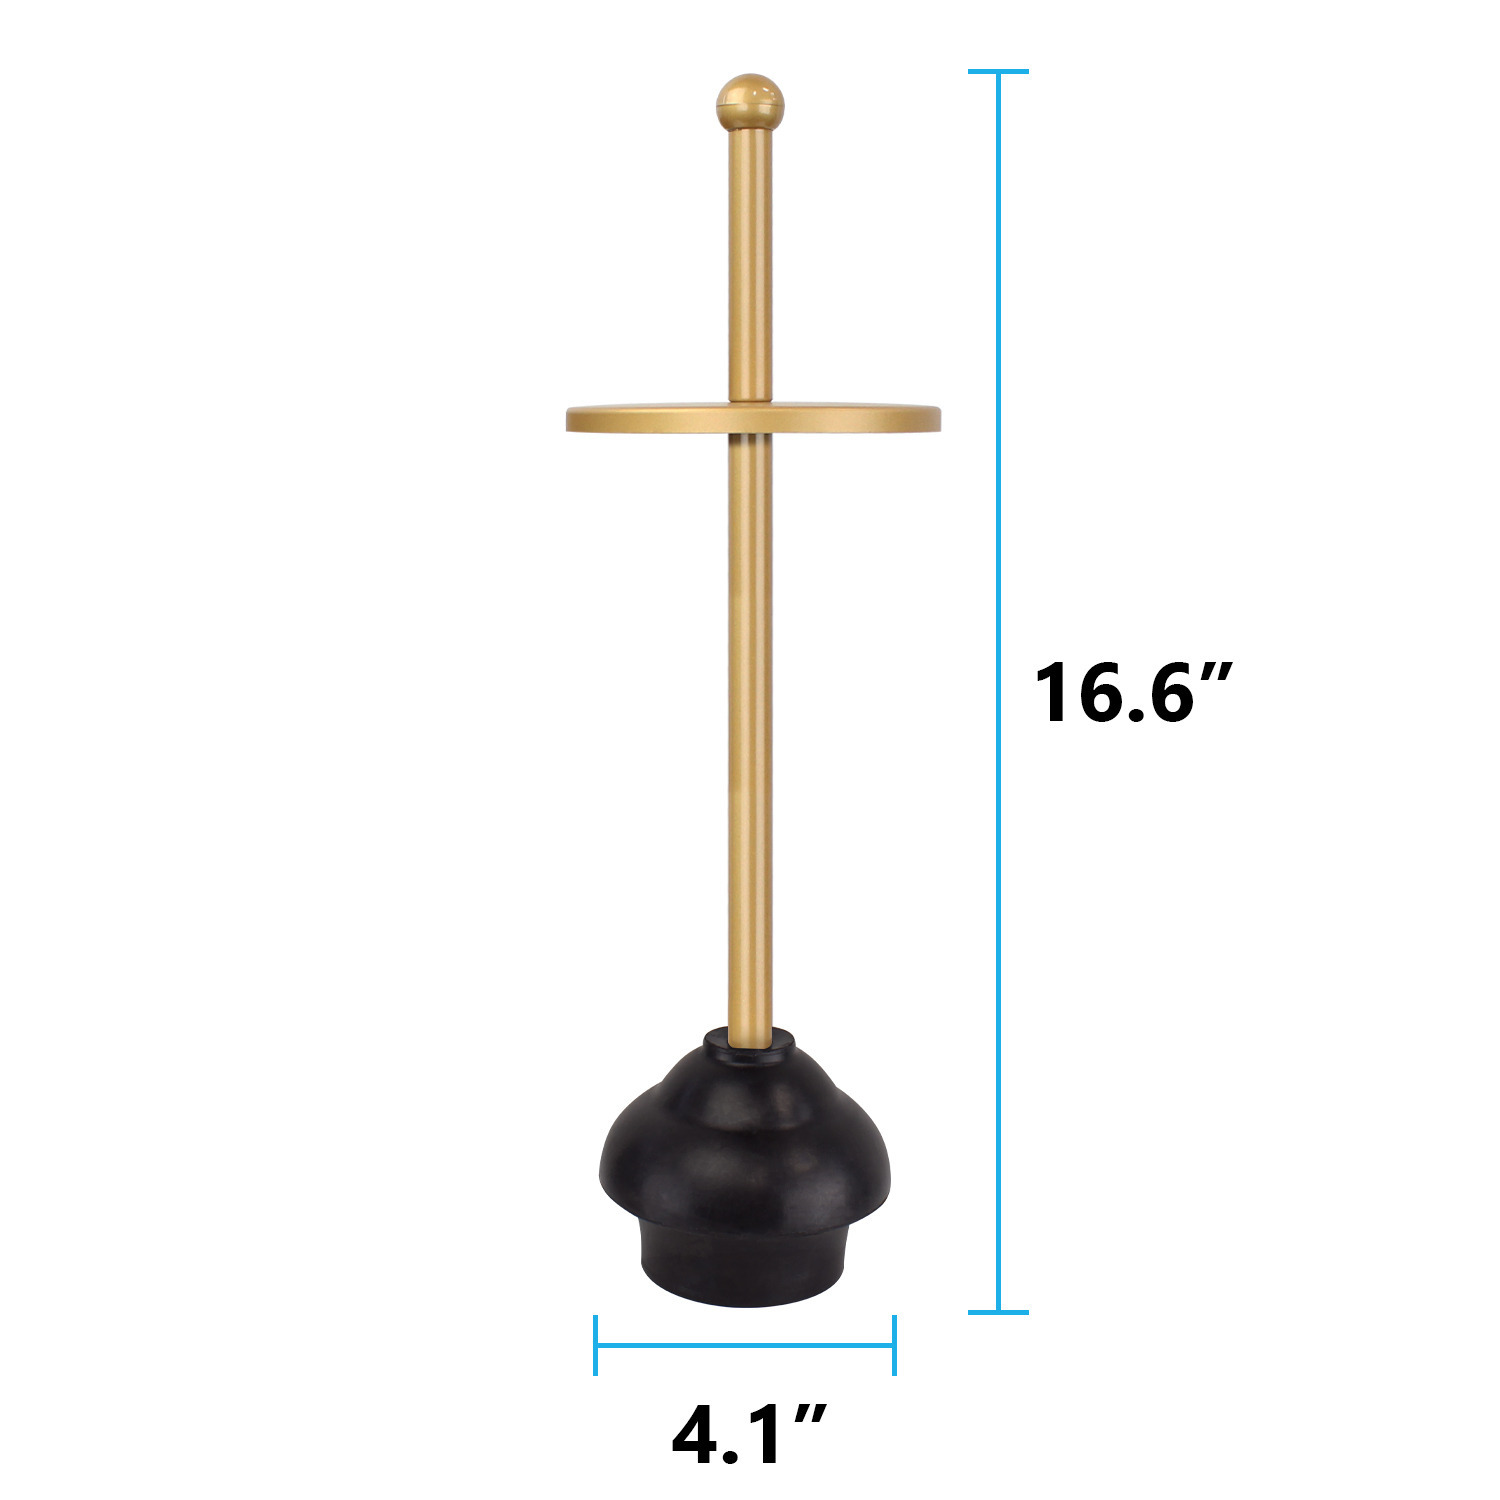 Toilet Plunger with Holder for Bathroom, Multi Drain Suitable also for Bathtubs, Quick Dry, Gold